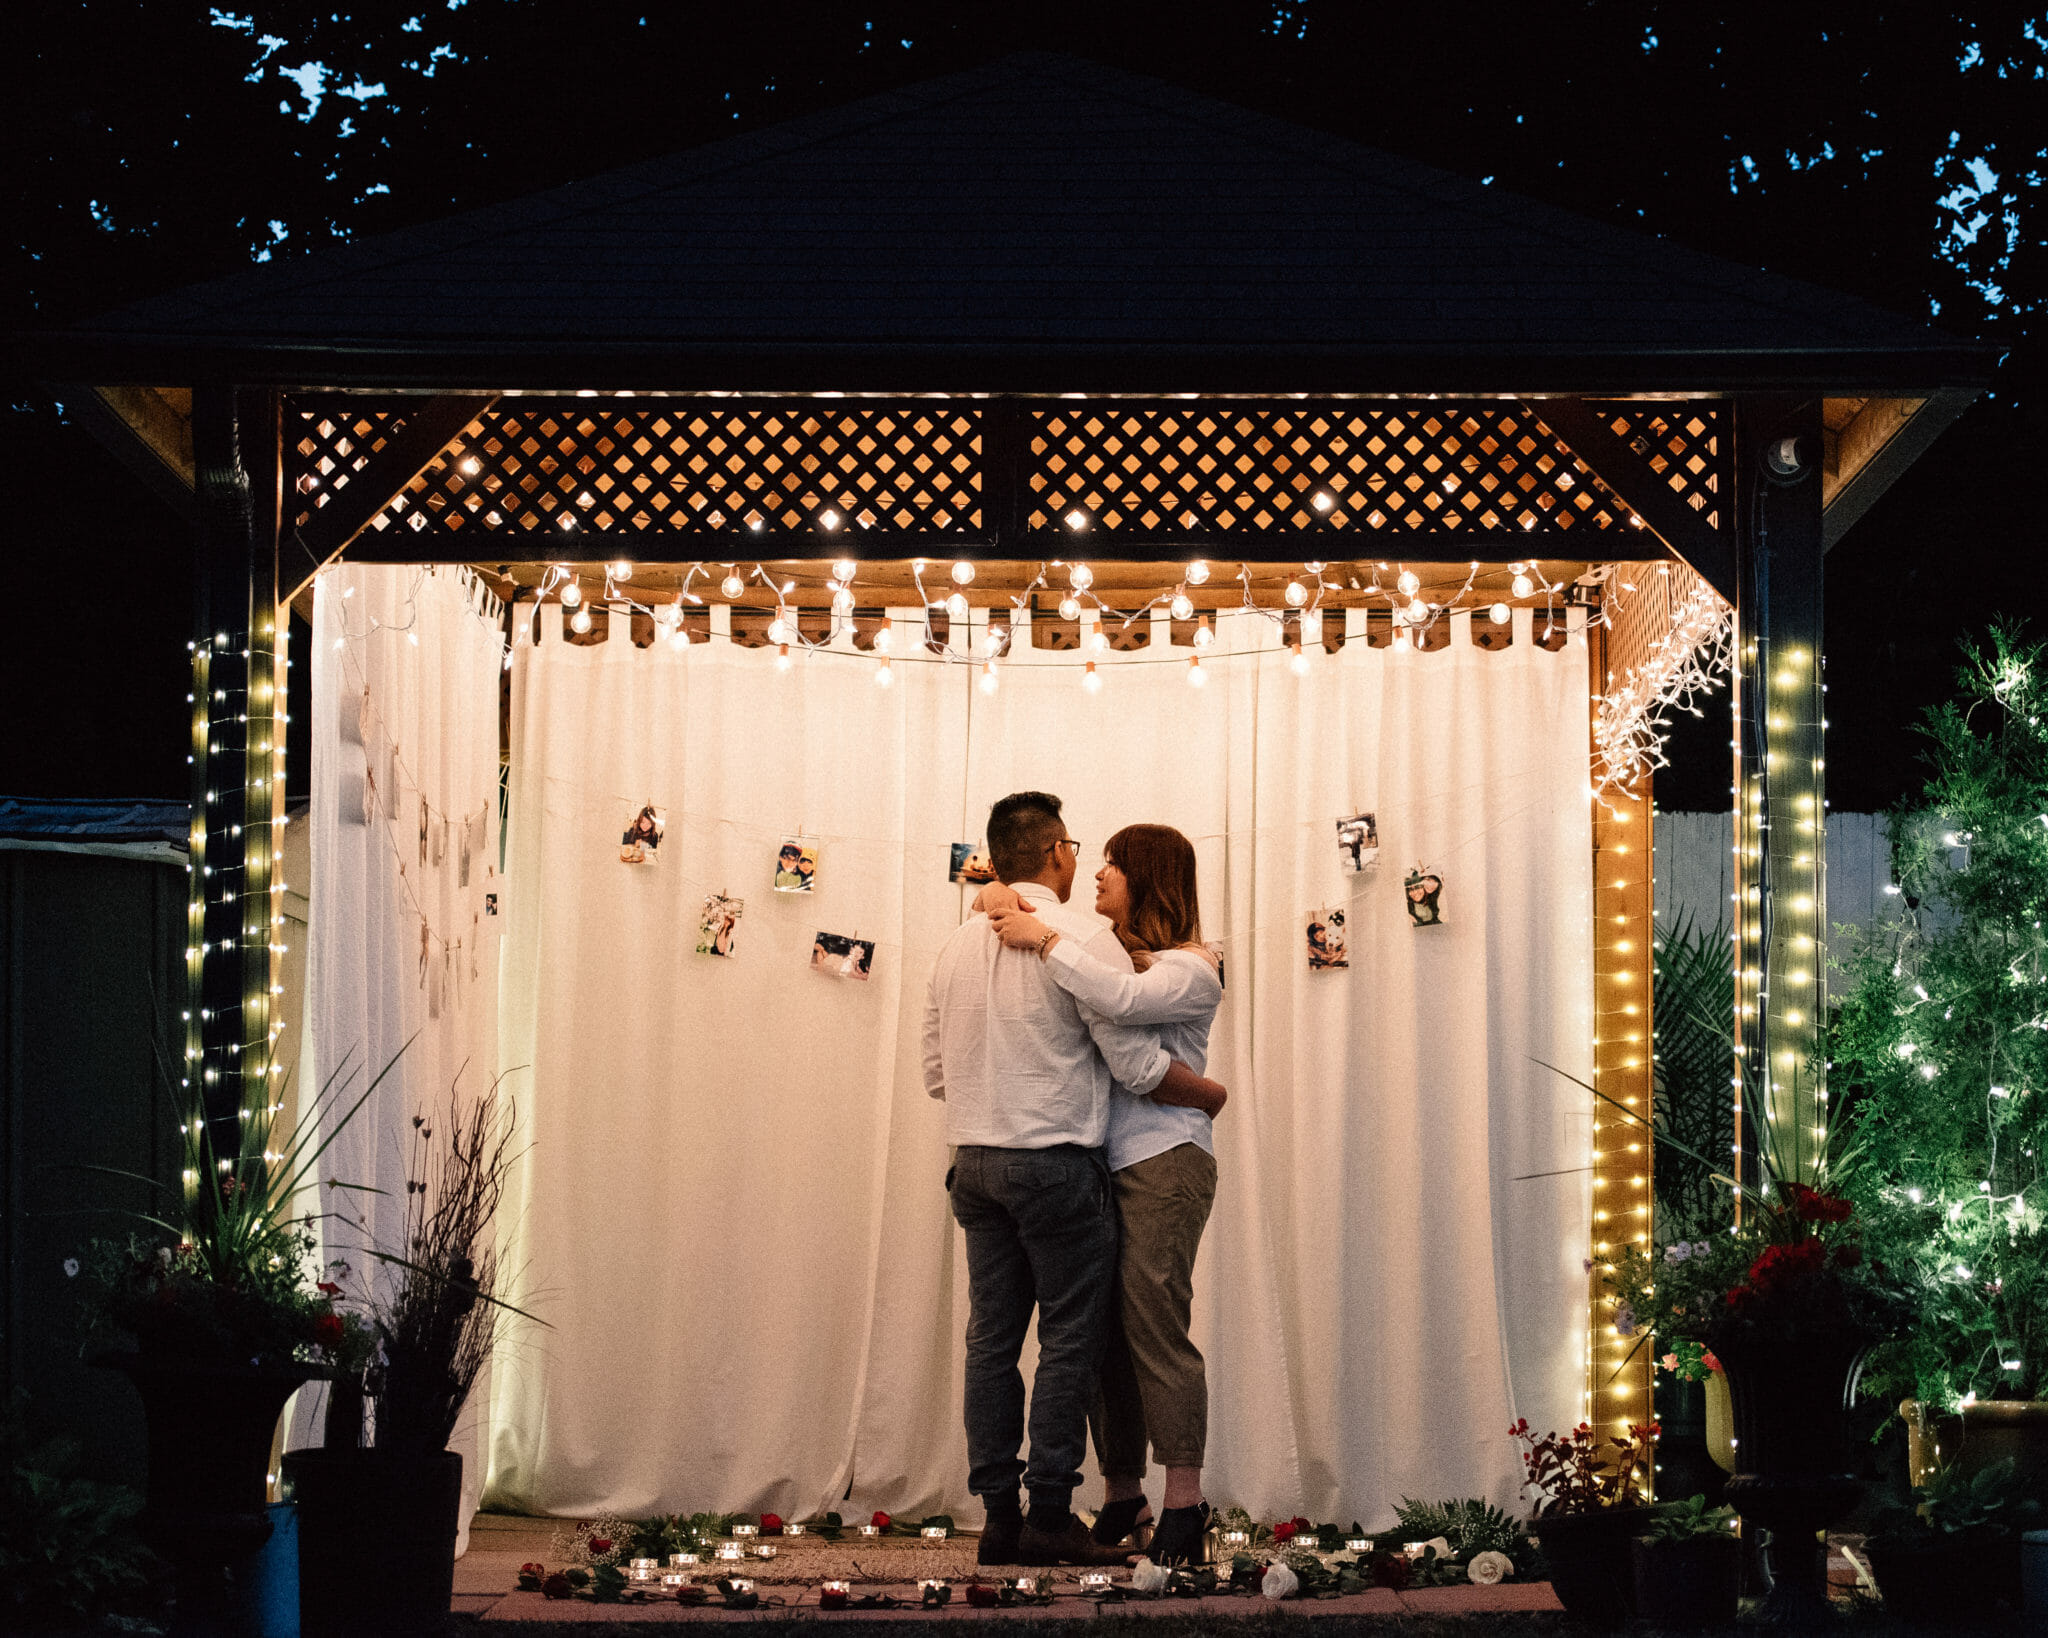 Backyard Marriage Proposal Scarborough Proposal Photographer Chelsey Cunningham